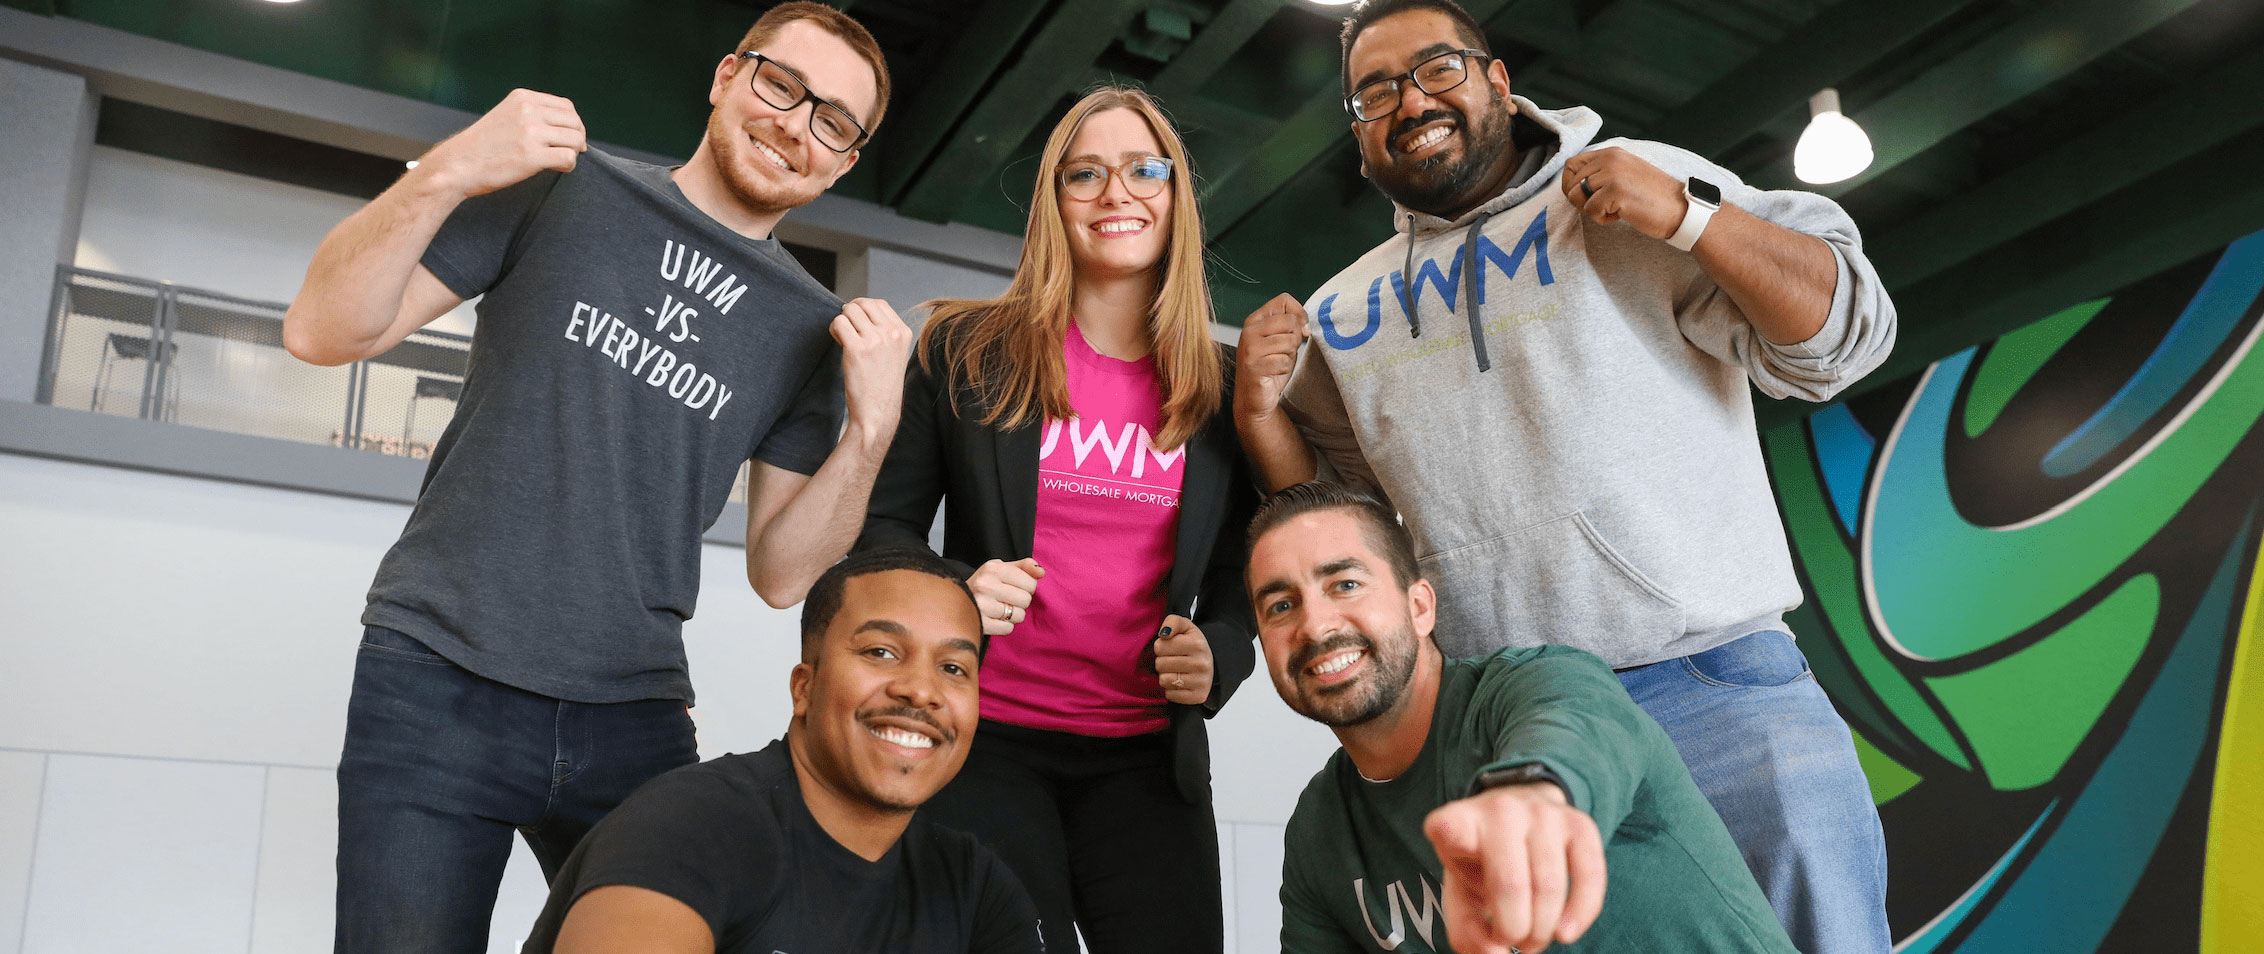 UWM team members posing with merch on the basketball court